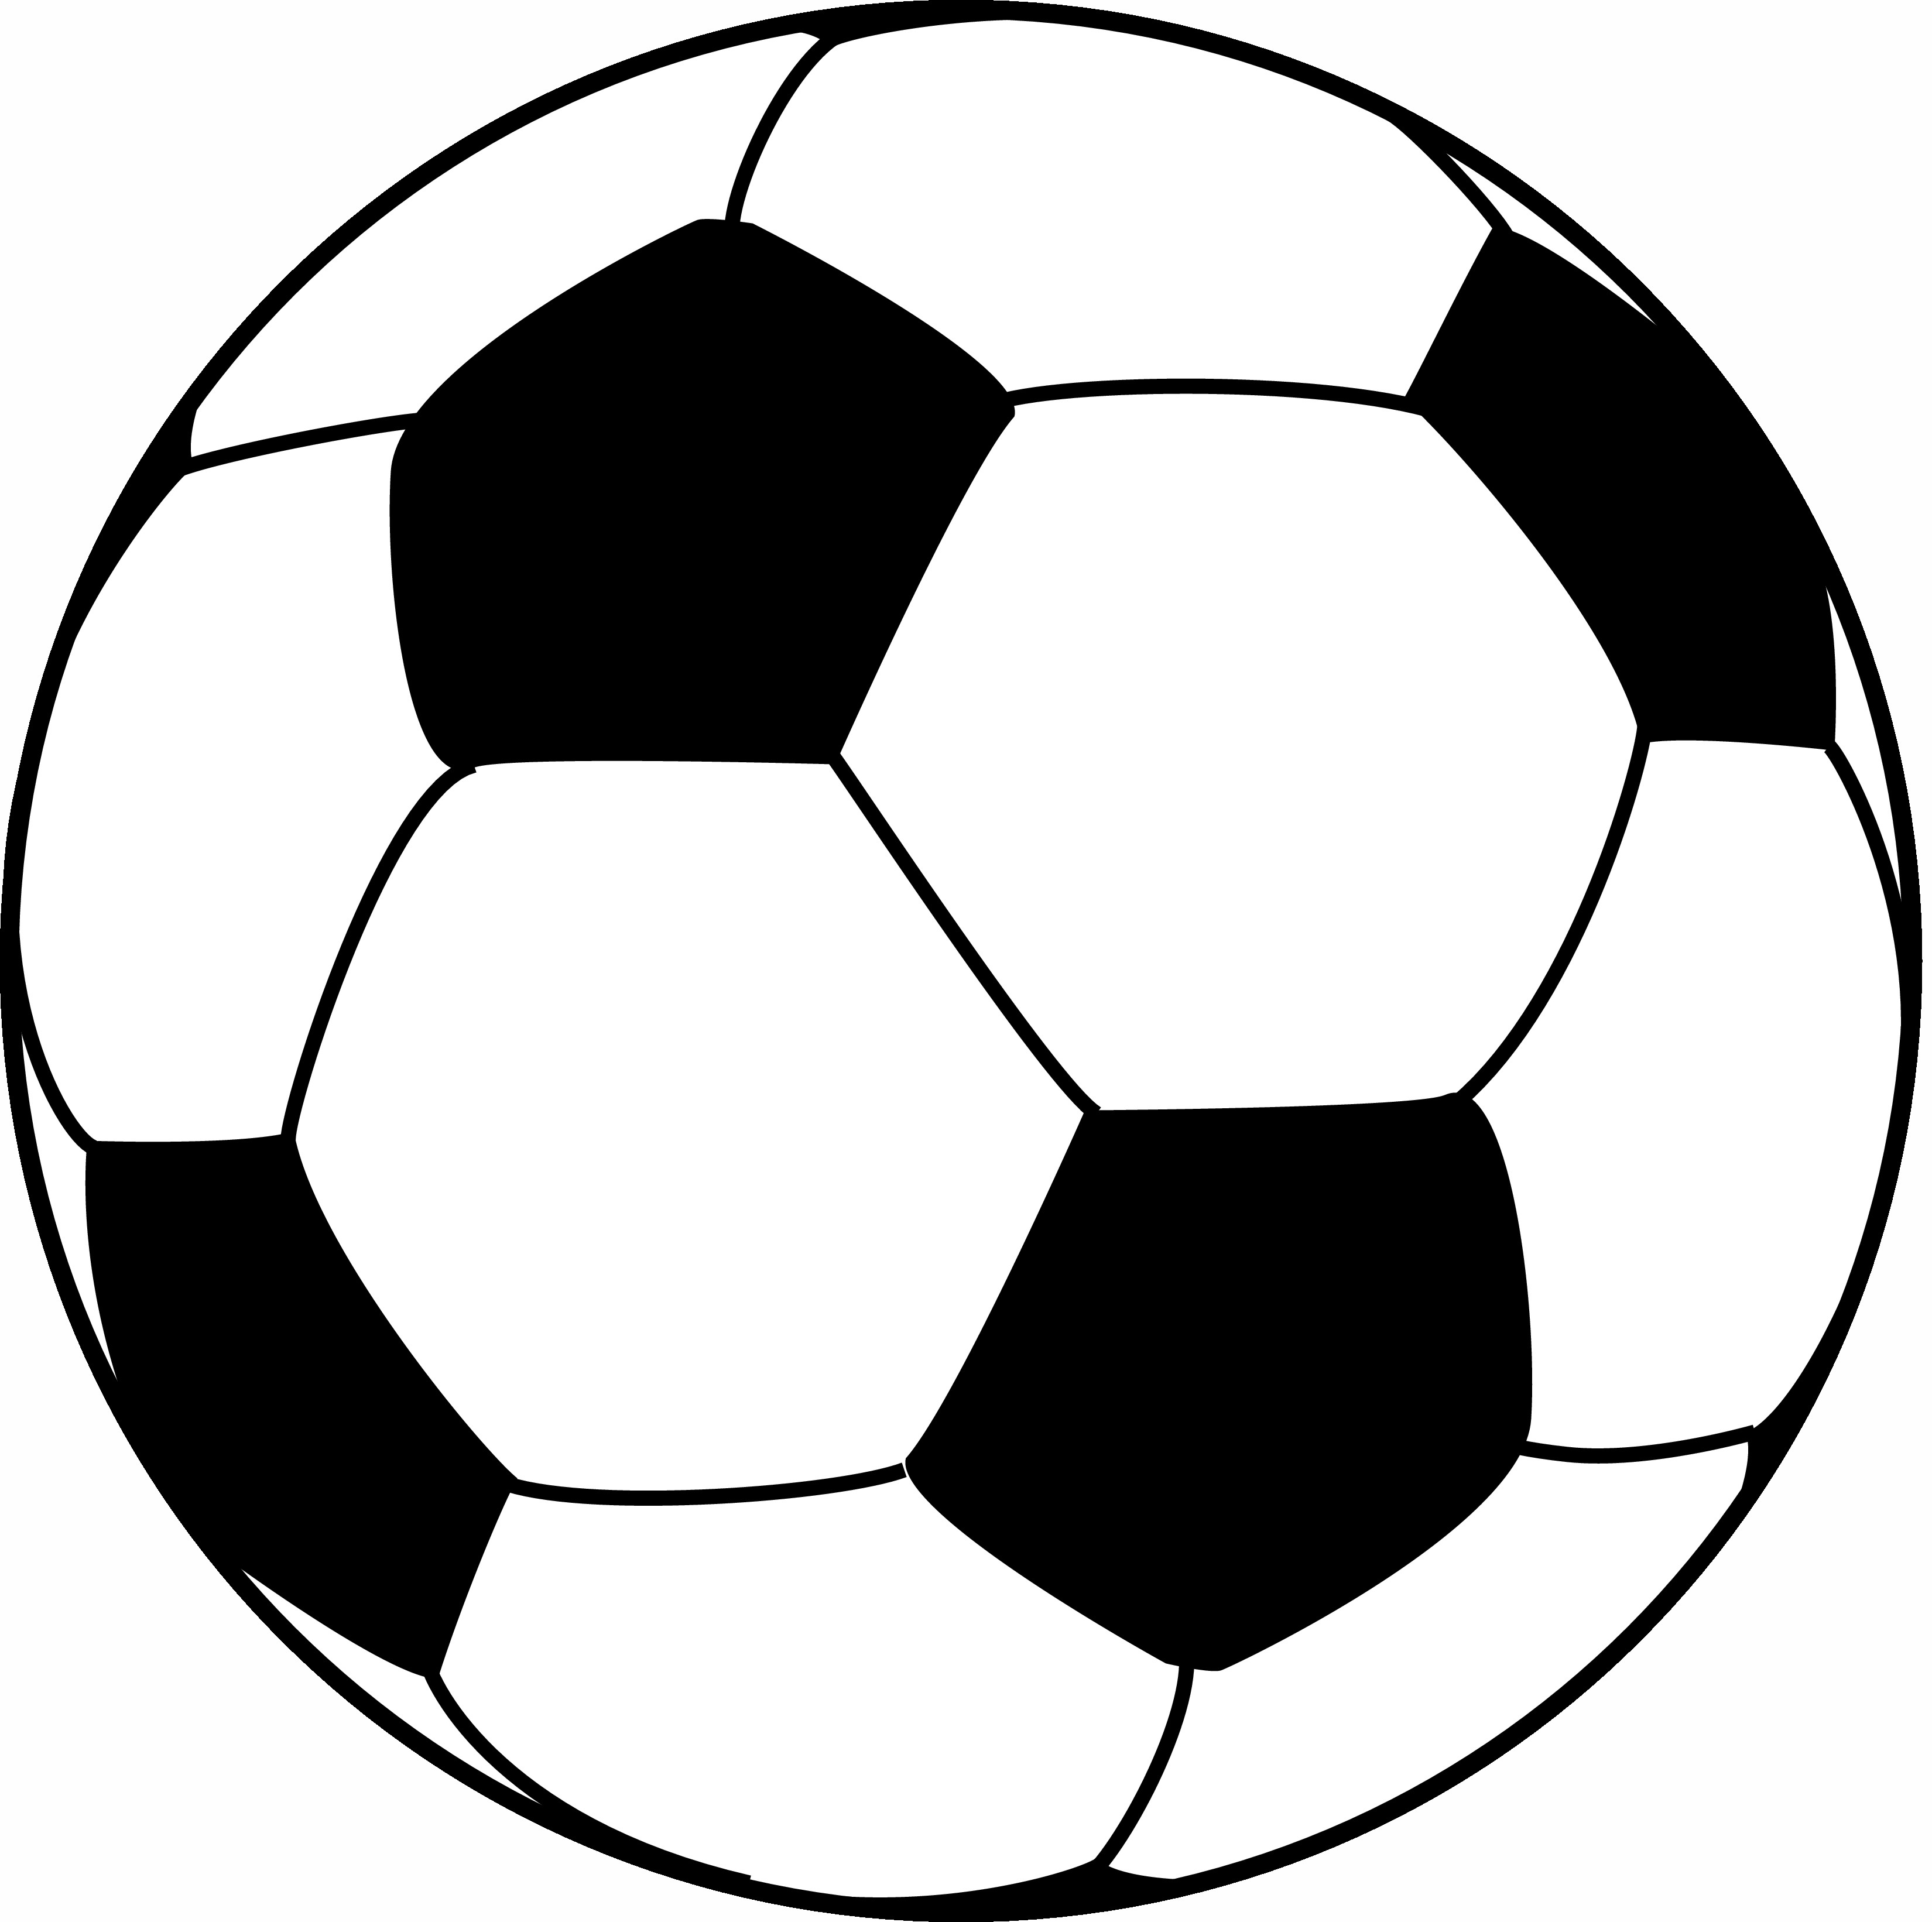 easy-soccer-ball-drawing-at-paintingvalley-explore-collection-of-easy-soccer-ball-drawing